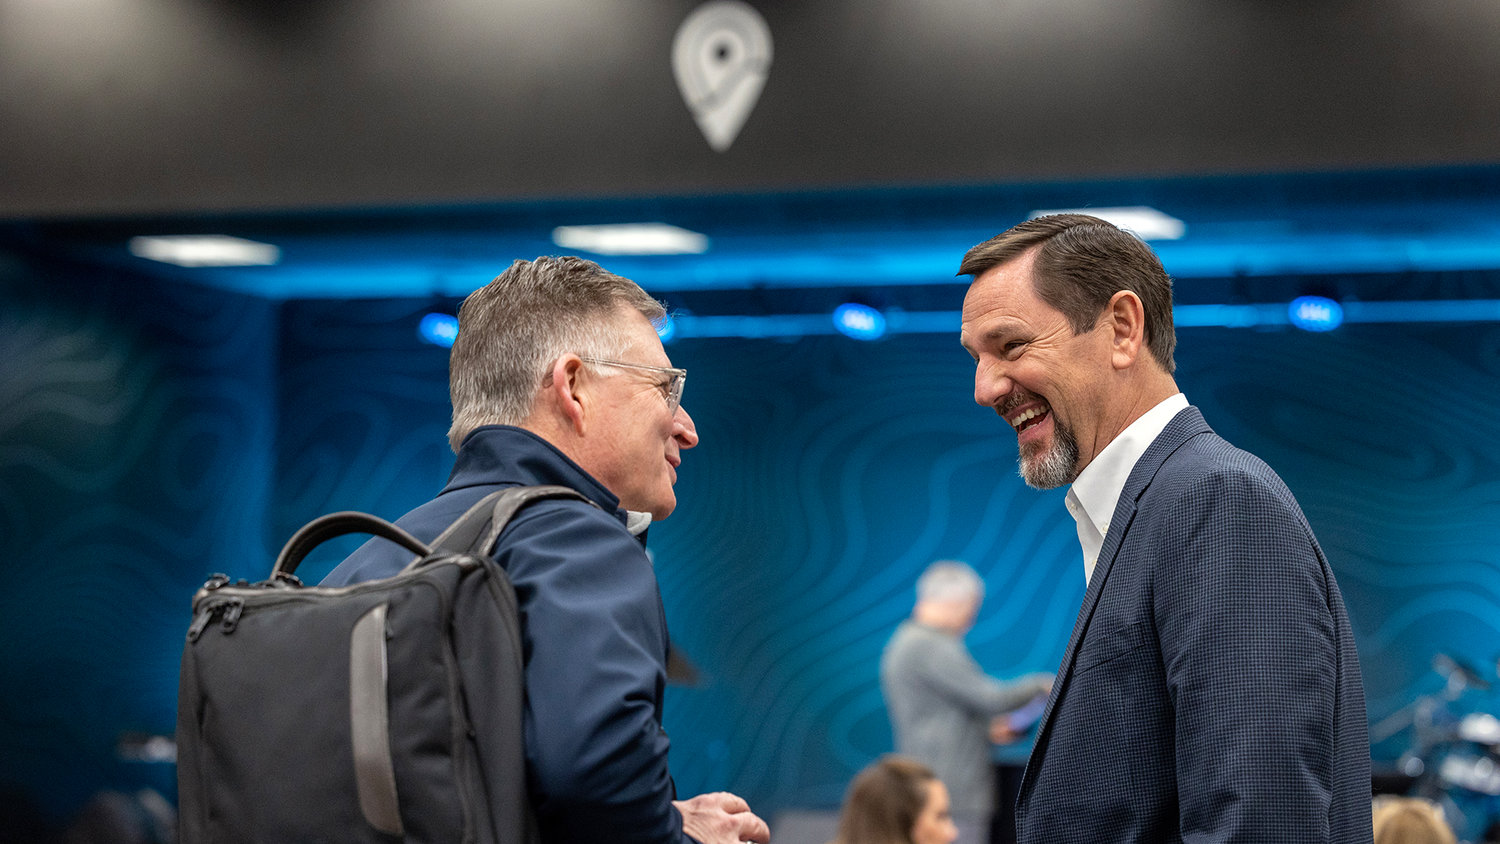 Keith Evans, IMB trustee from the Northwest, speaks with Paul Chitwood, IMB president, before the start of the February meeting. (Photo/International Mission Board)